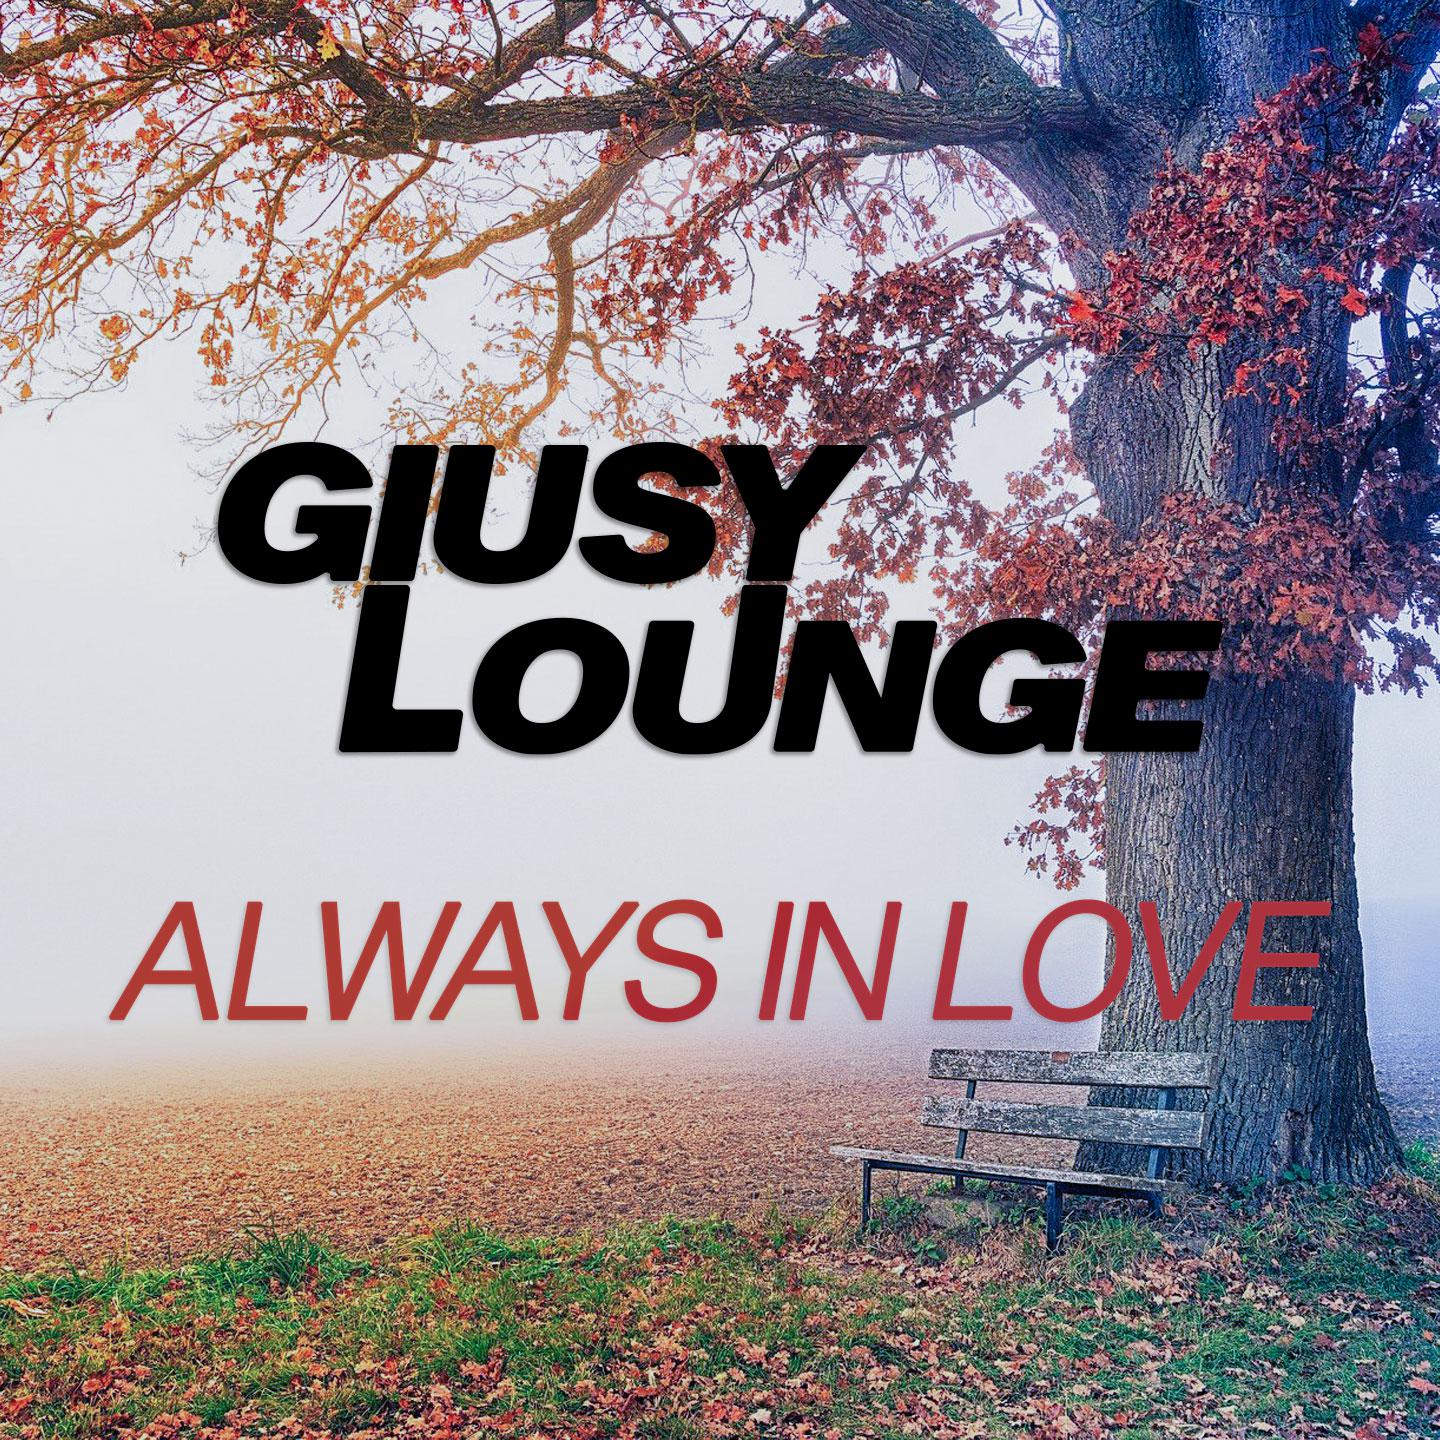 Giusy Lounge - It Must Be Love